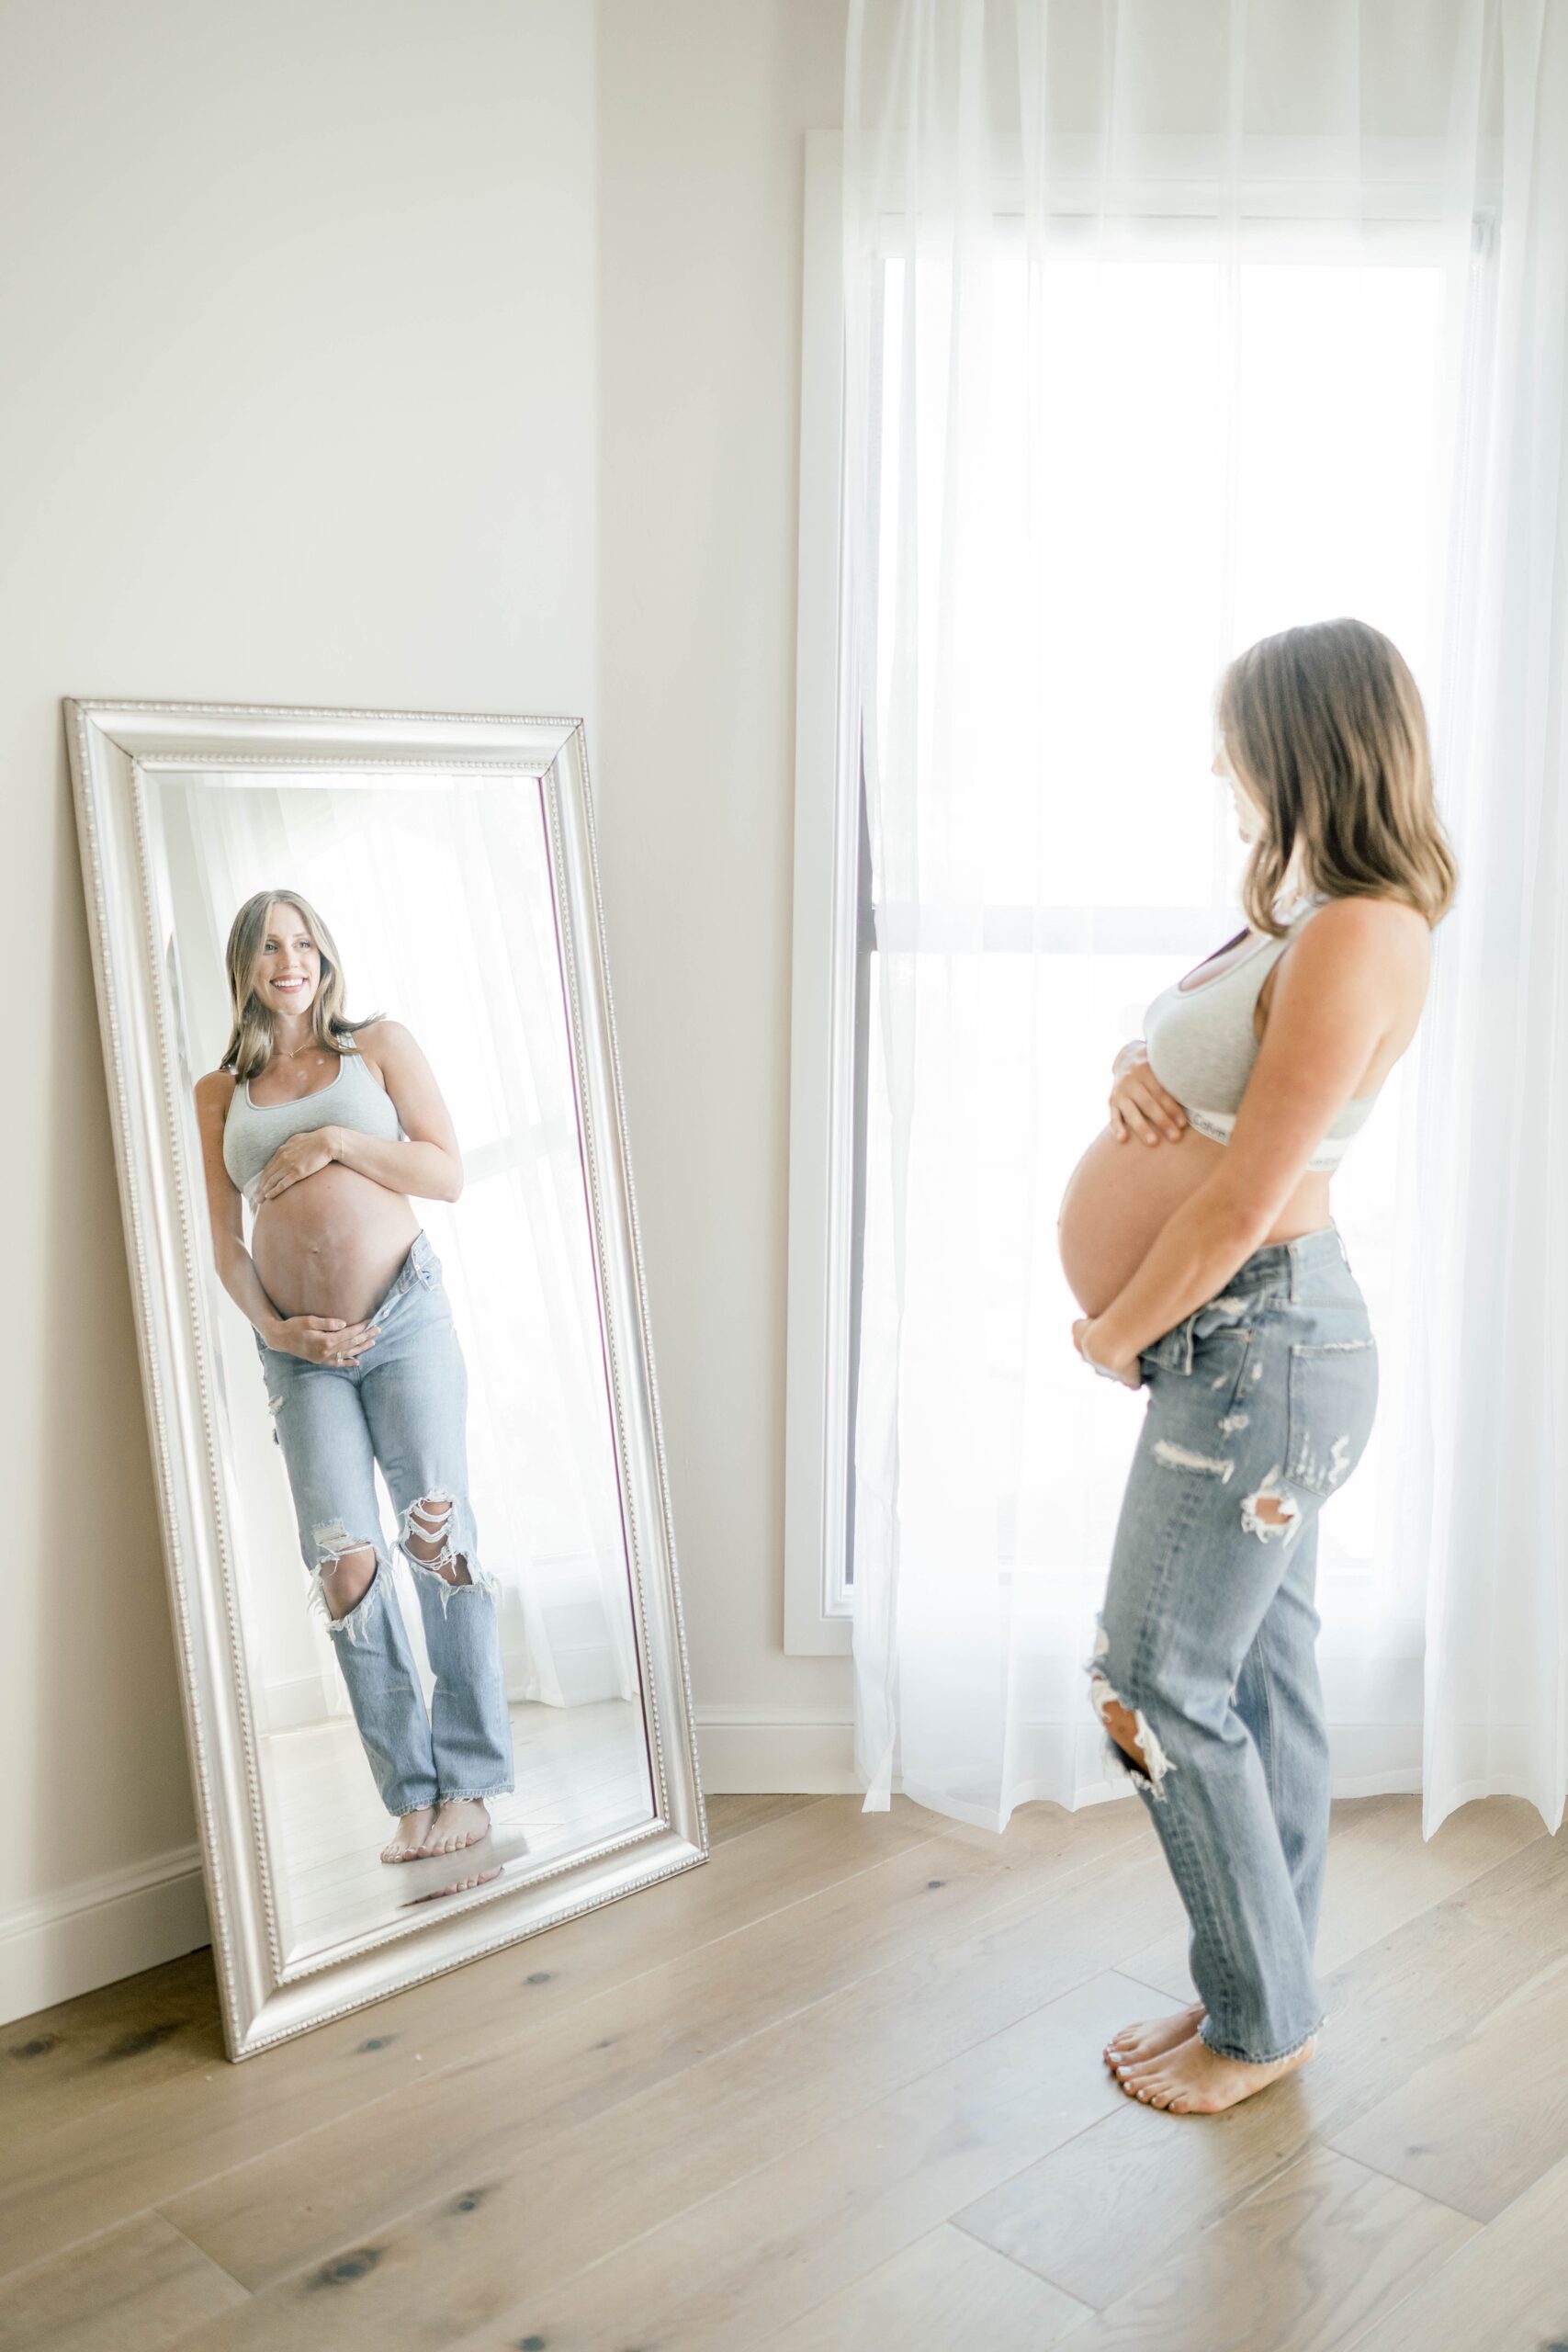 A mother to be stands in a studio in front of a mirror wearing jeans and sports bra water birth okc